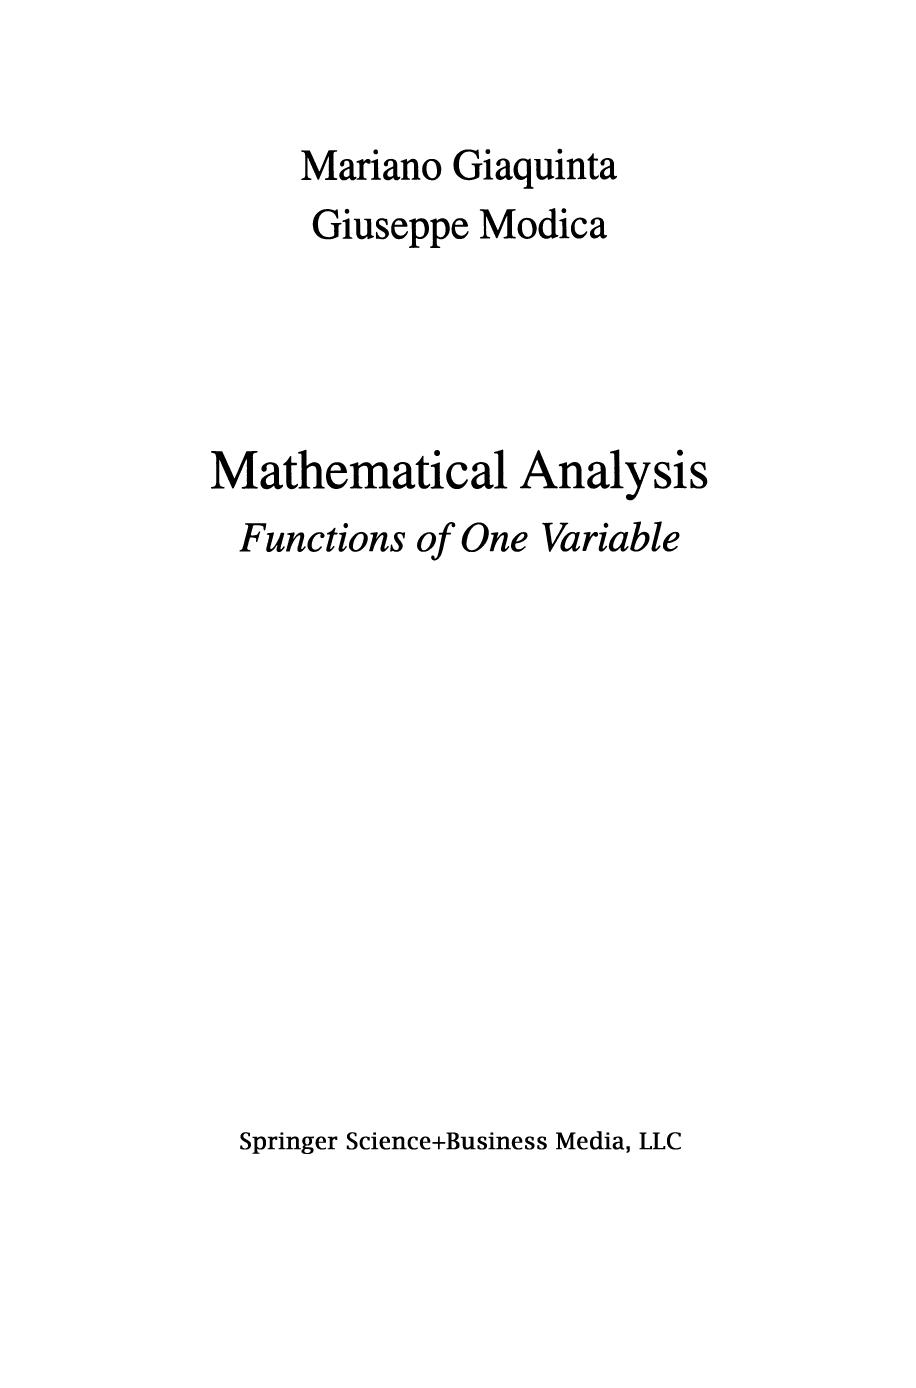 Mathematical Analysis: Functions of One Variable